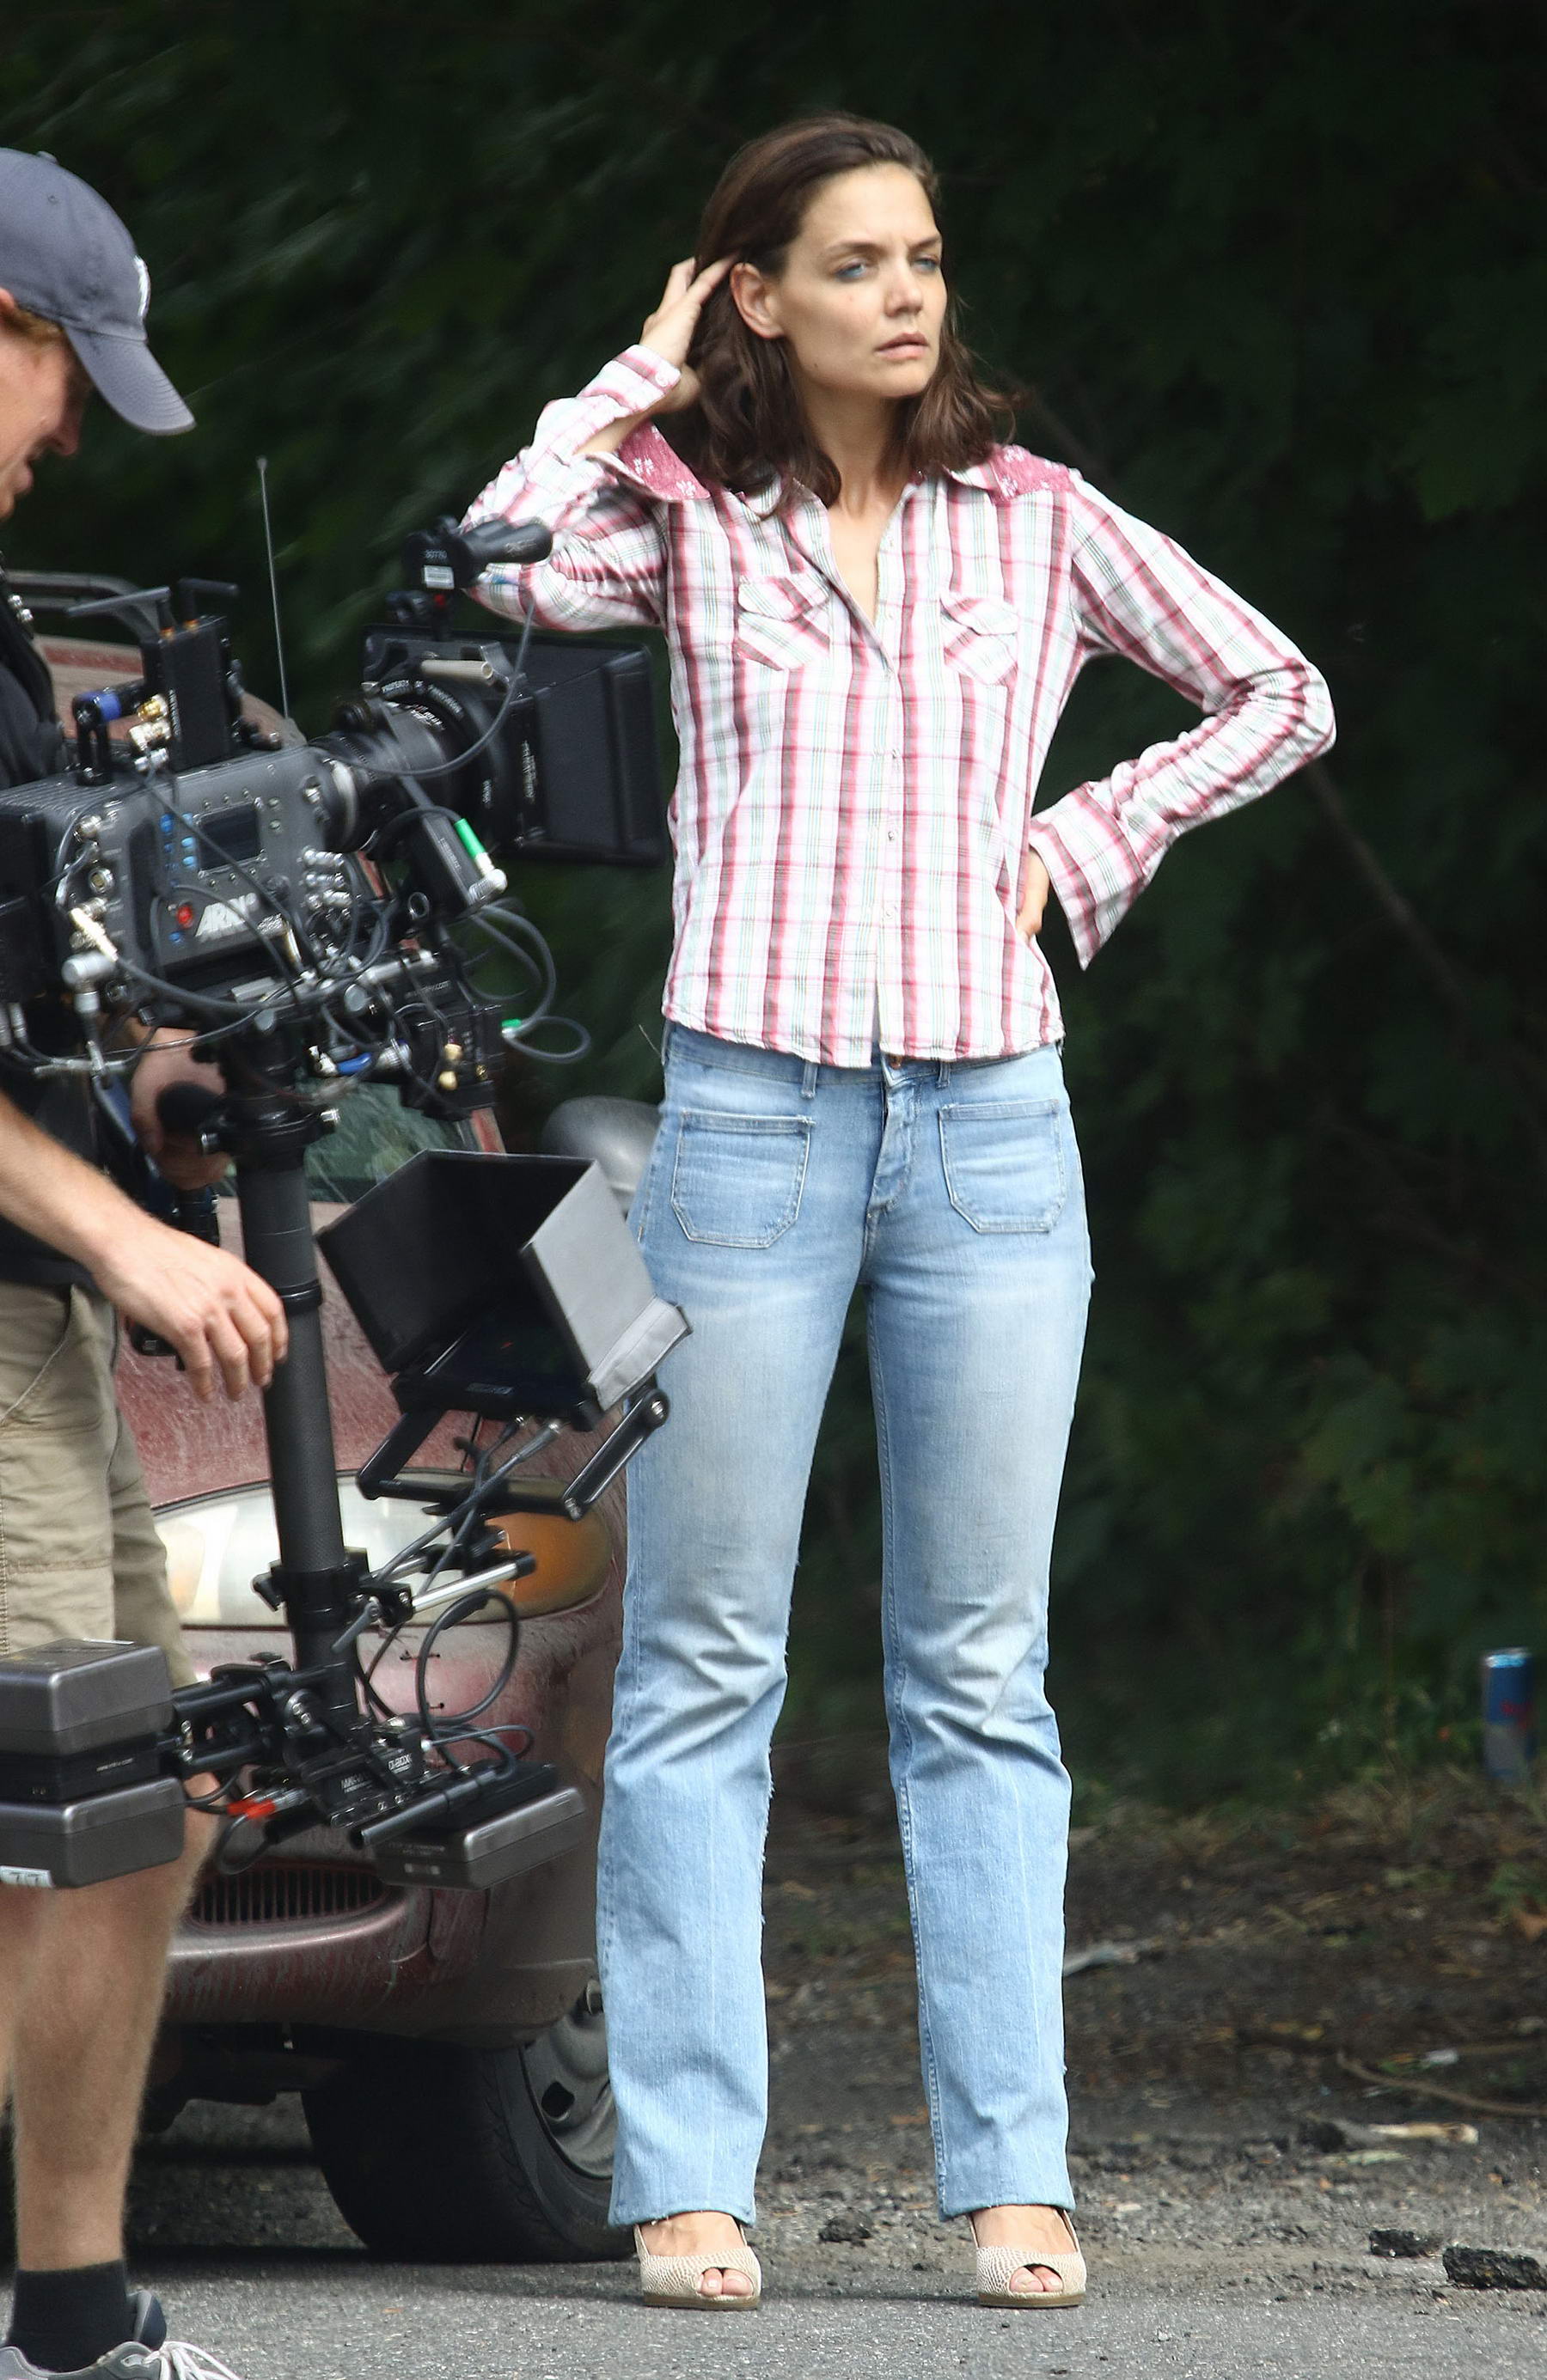 Katie Holmes On The Set Of All We Had In New York 8202015 9 Lacelebsco 